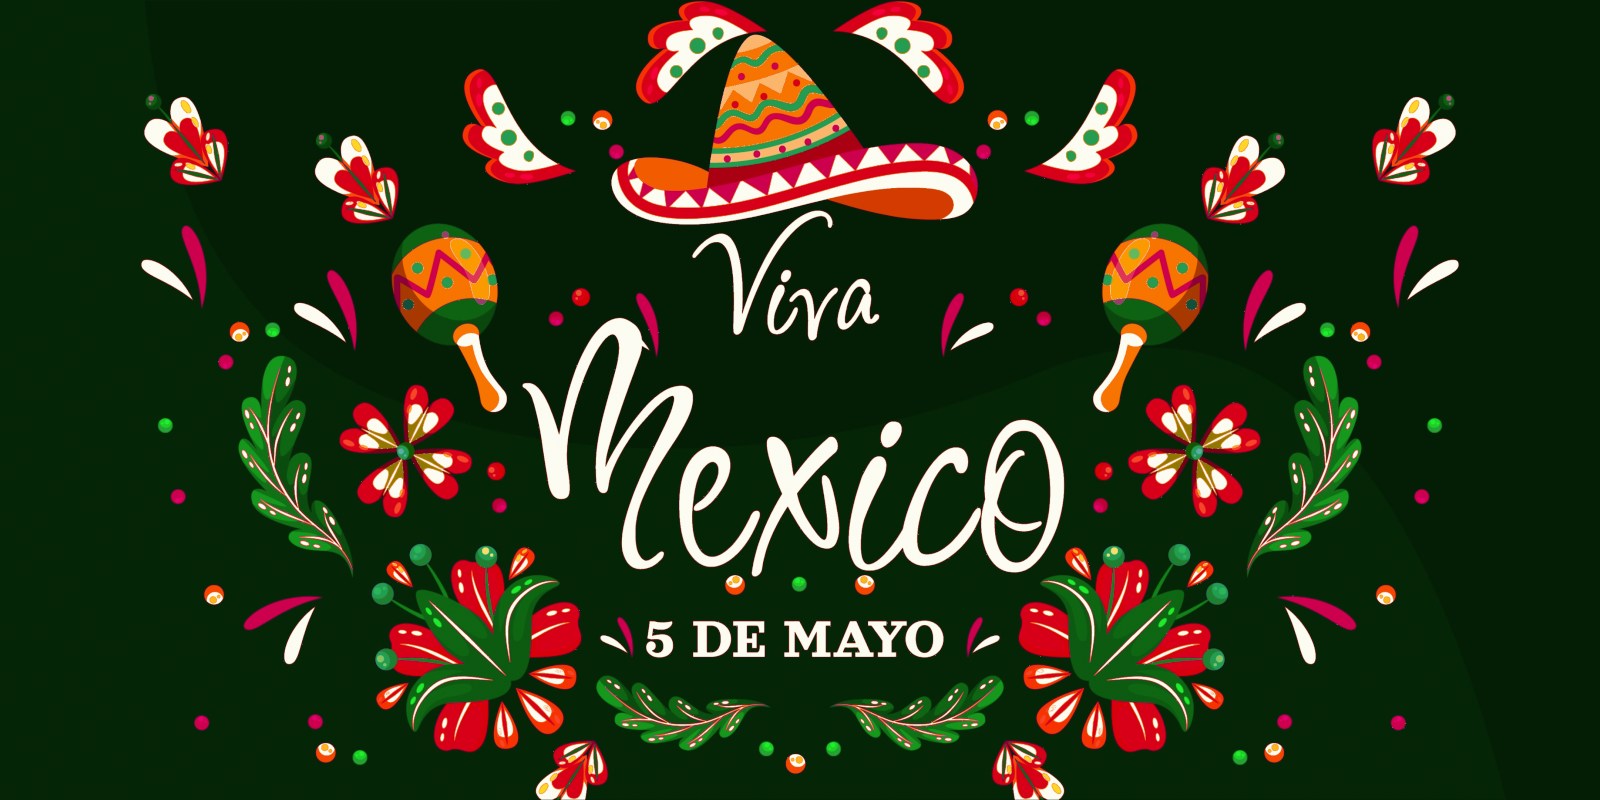 Viva Mexico and the date displayed in festive Mexican decor